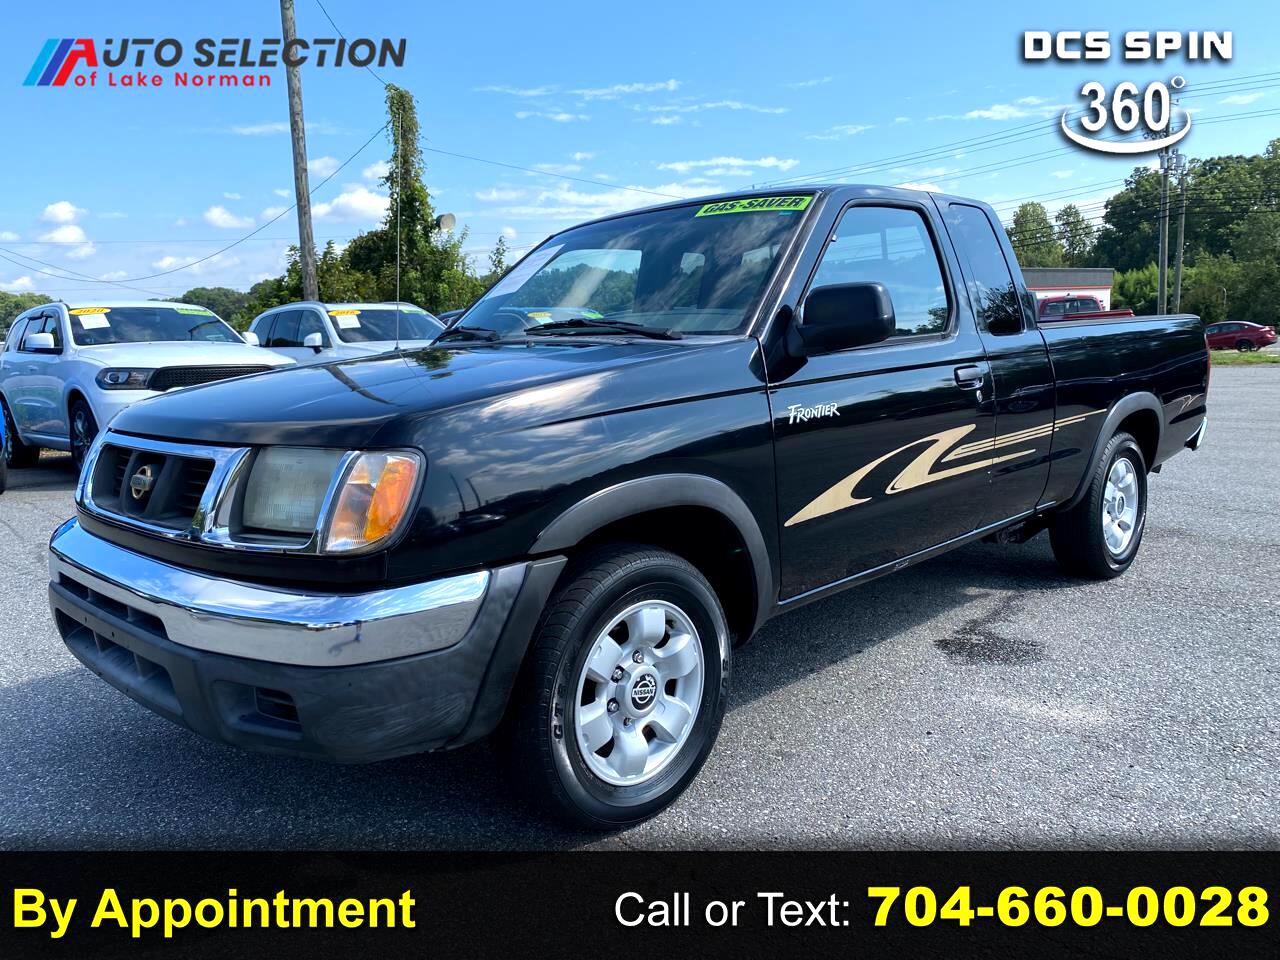 1998 Nissan Frontier 2WD XE King Cab Manual